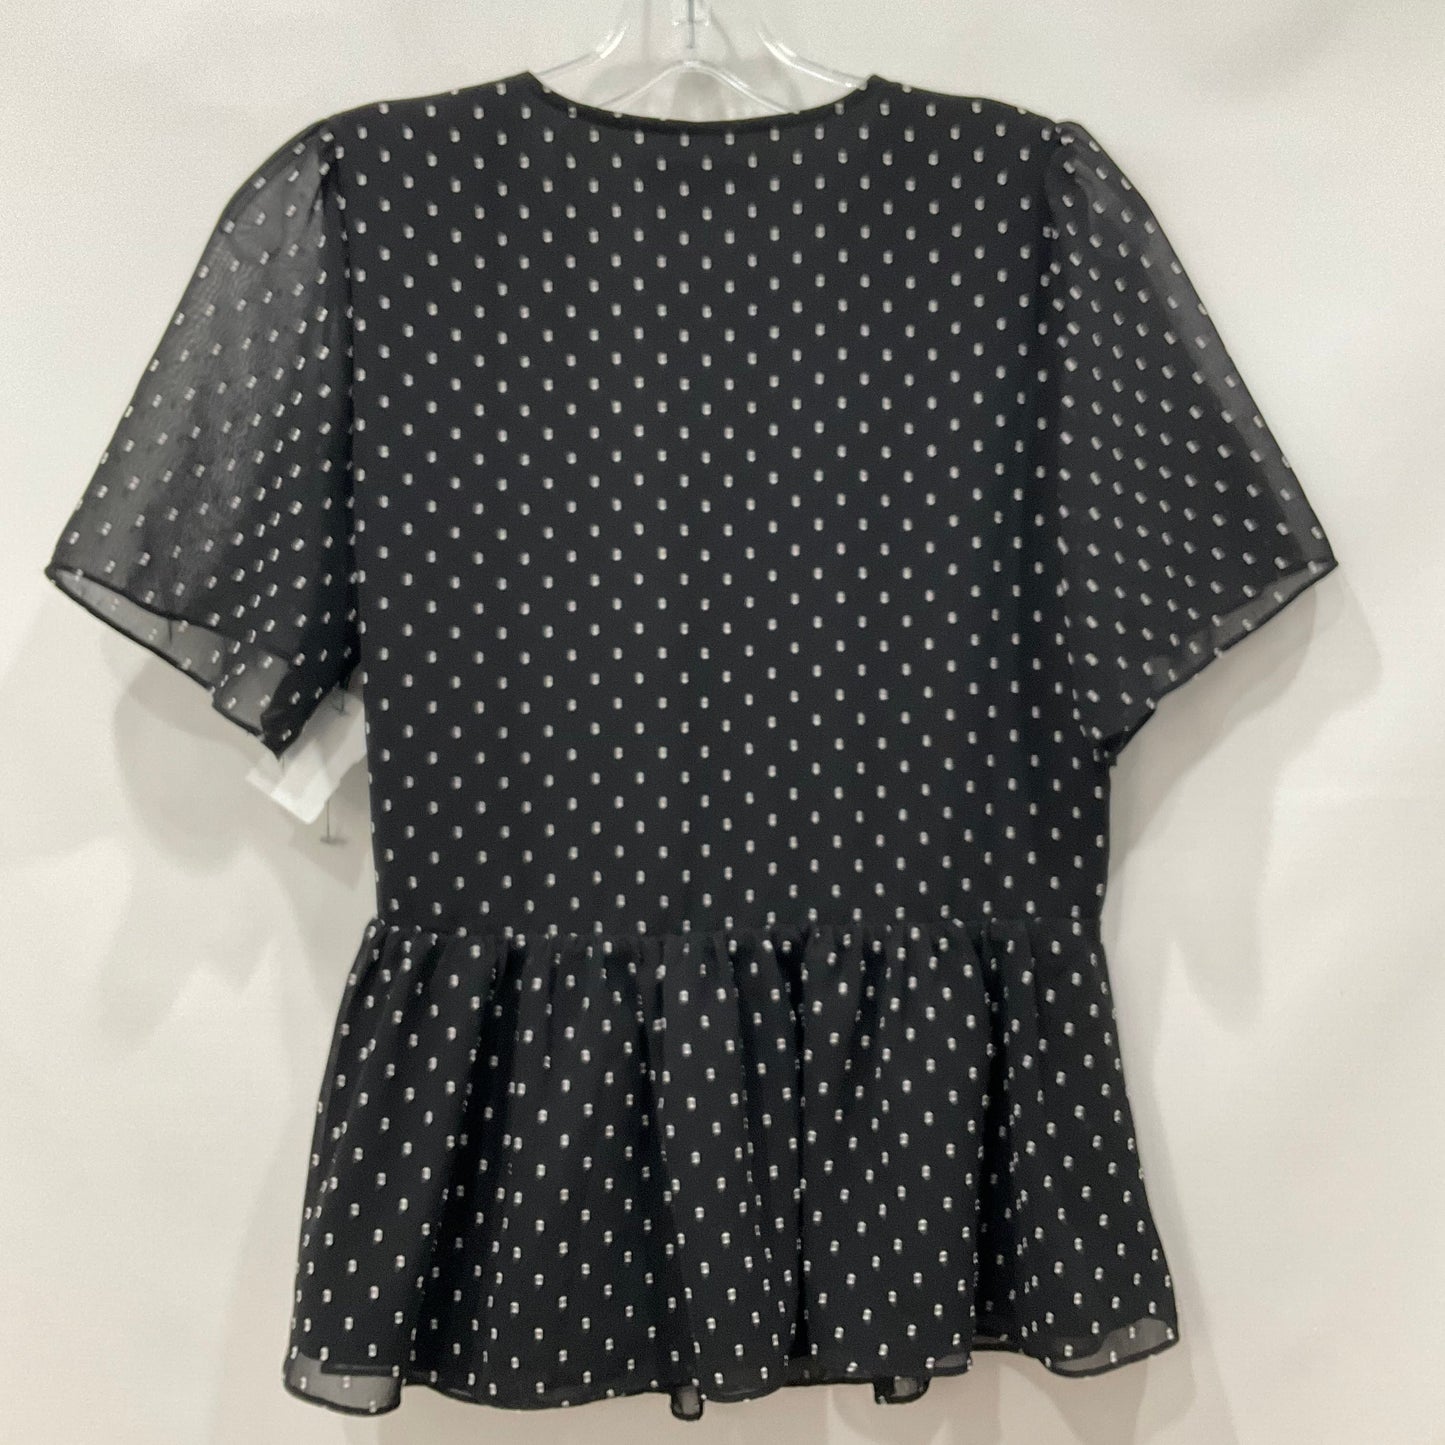 Black Top Short Sleeve Madewell, Size Xs